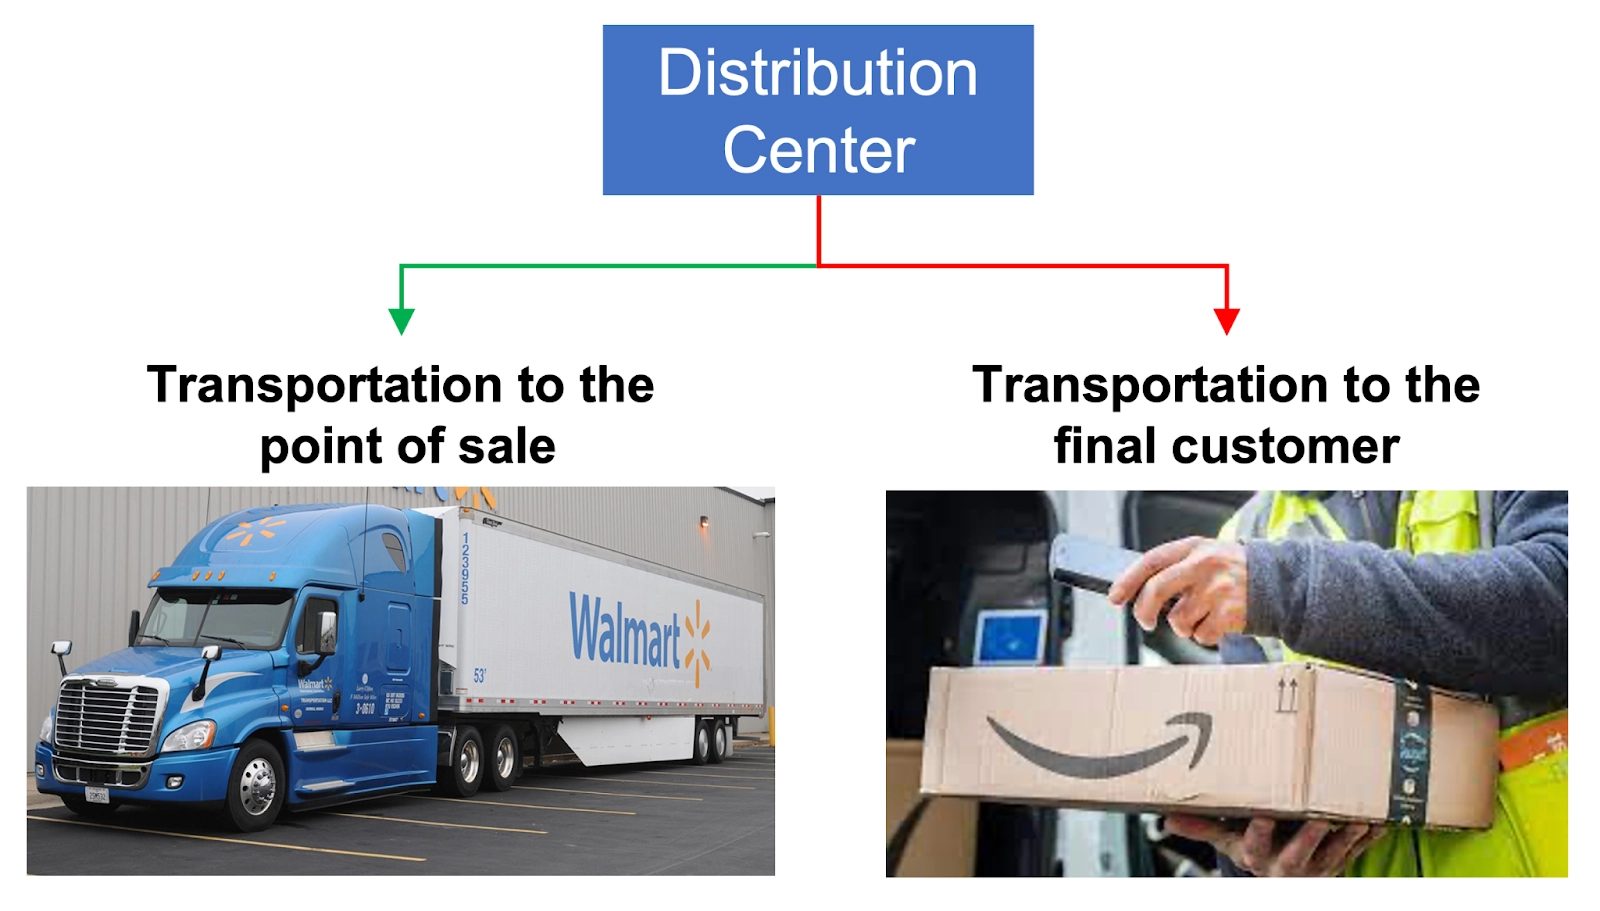 Supply Chain transportation from a distribution center